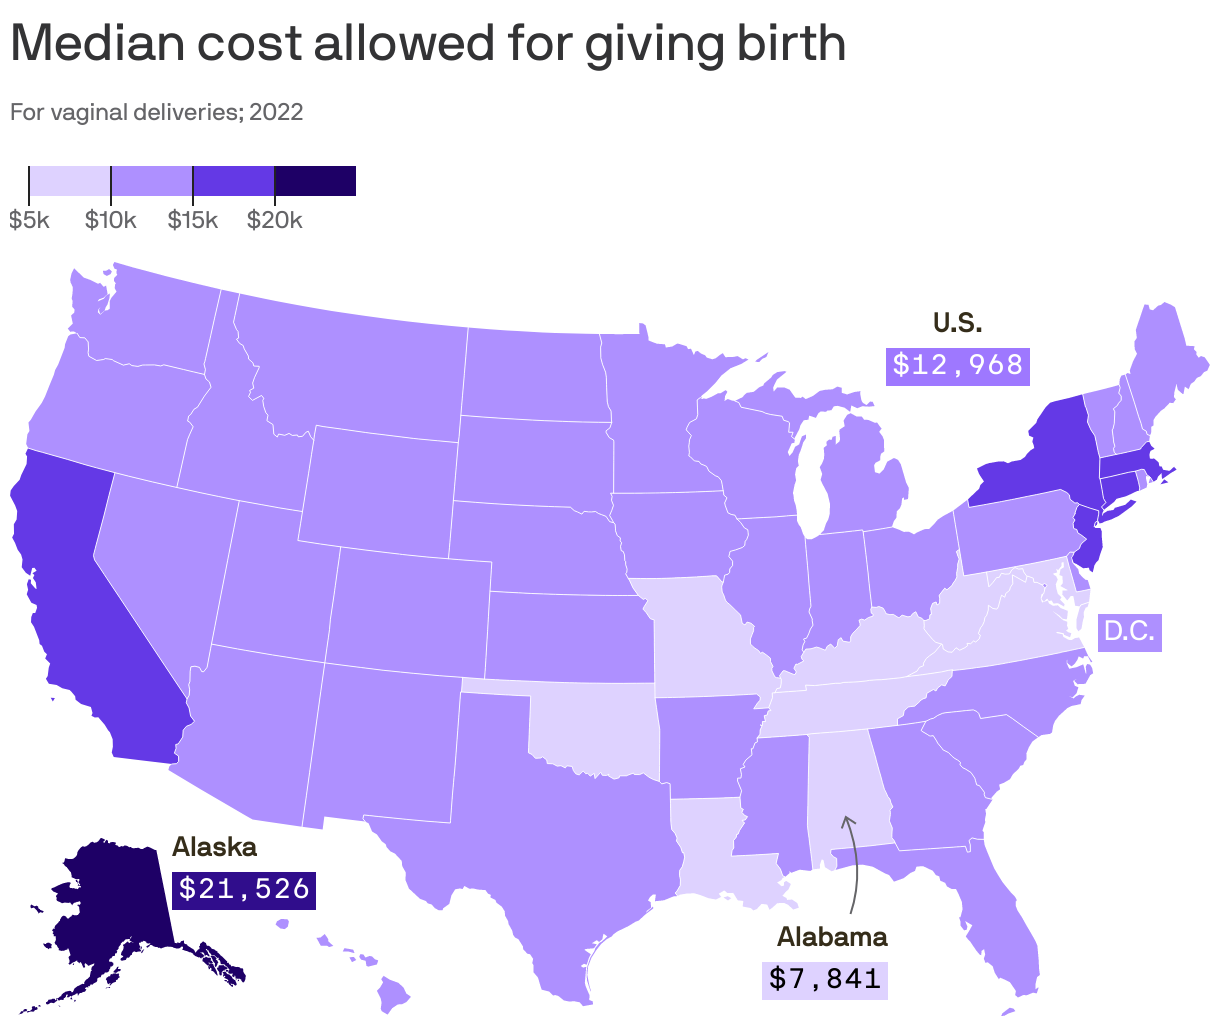 Median cost allowed for giving birth